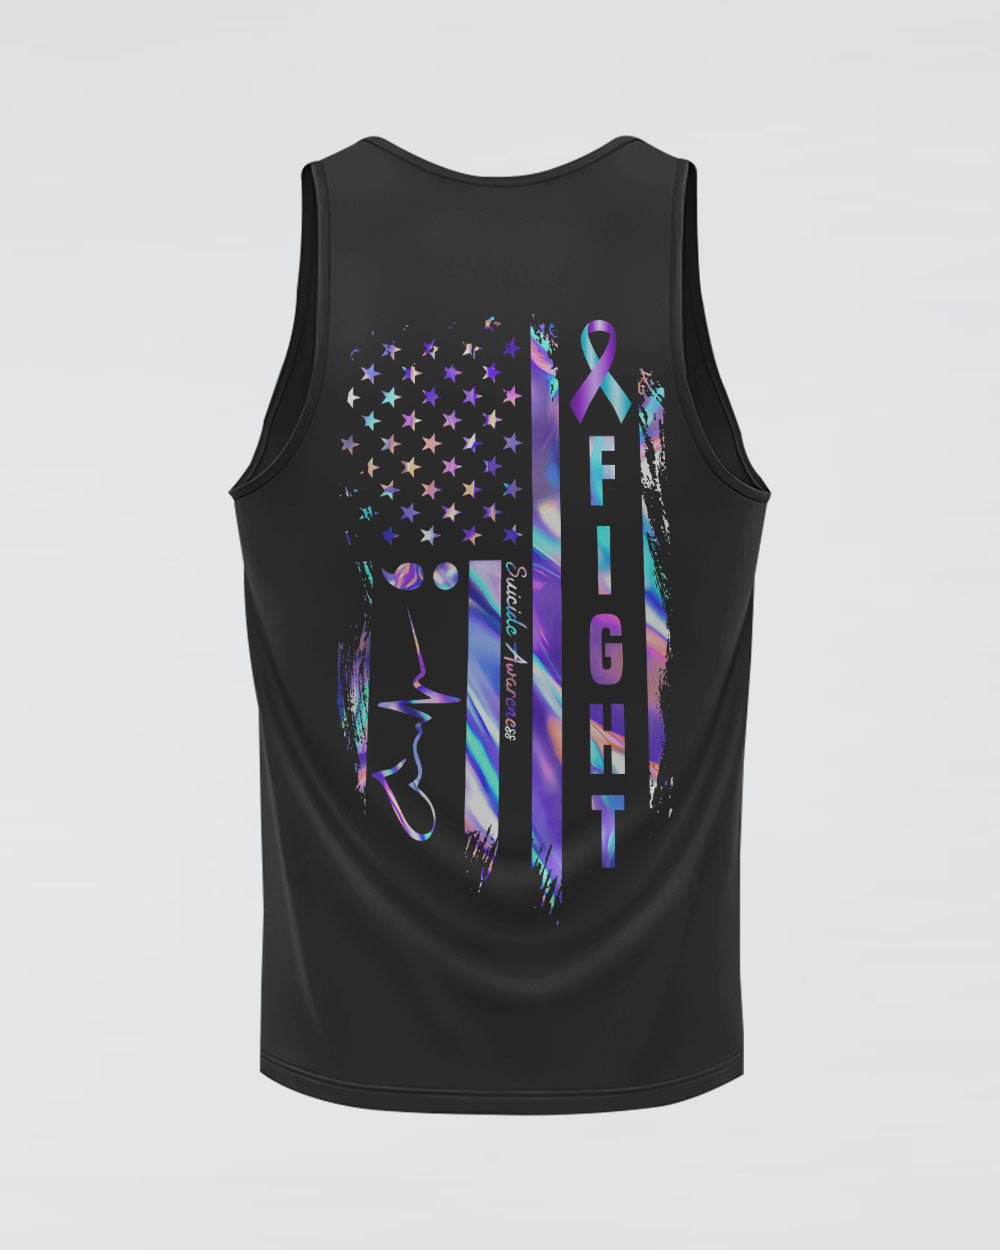 Holo Fight Suicide American Flag Women's Suicide Prevention Awareness Tanks